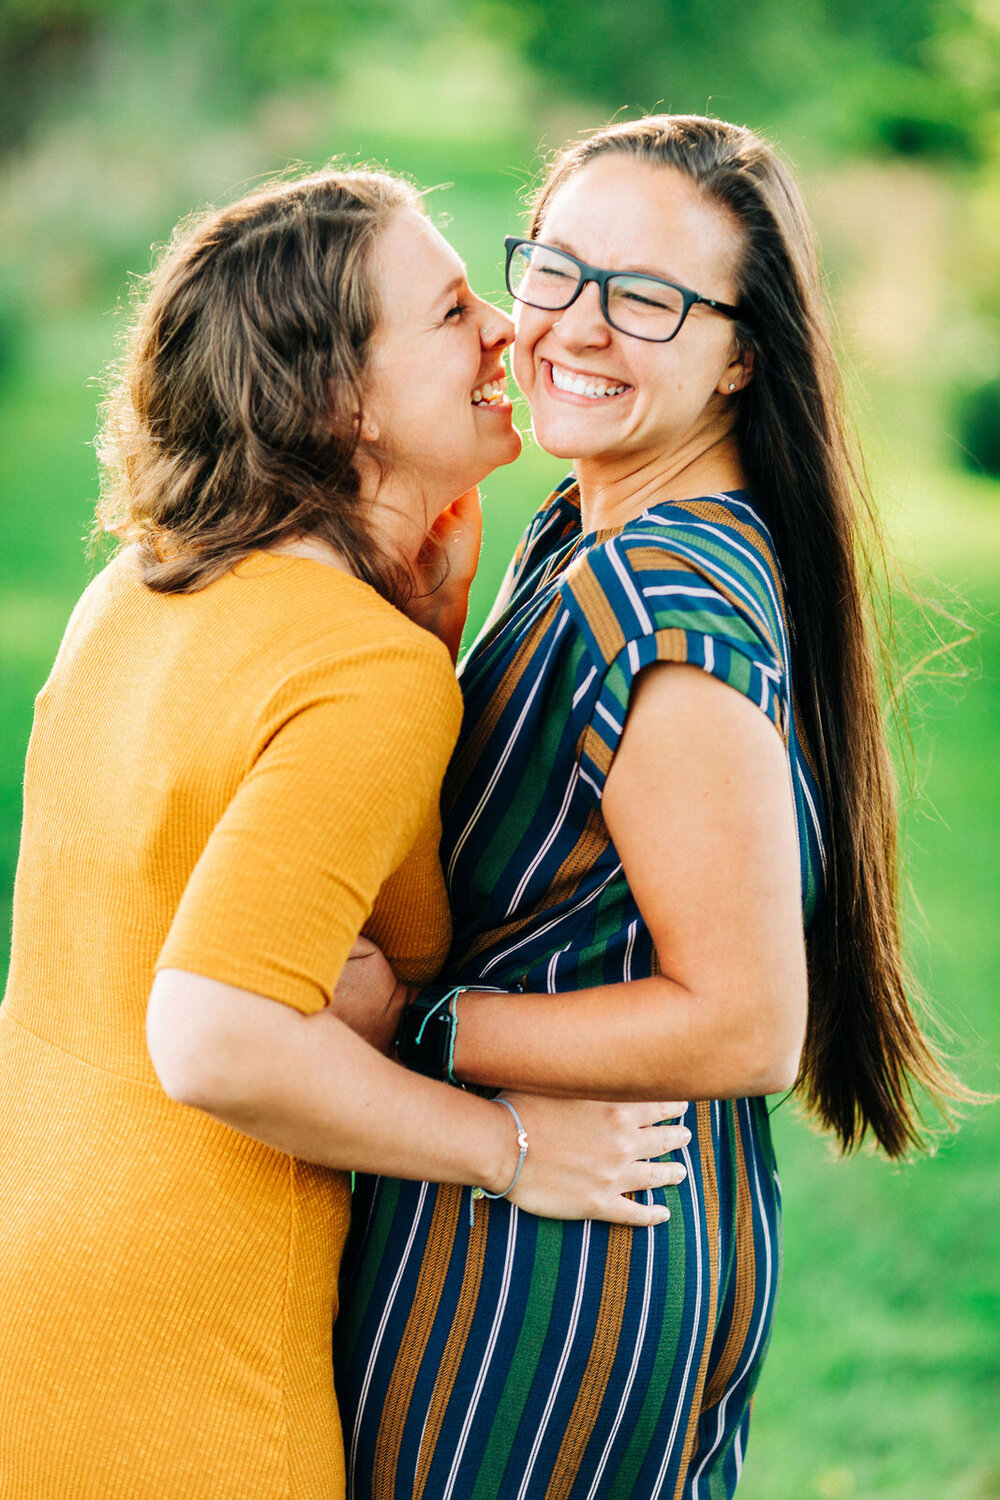 a lesbian couple laughing and smiling while embraced 